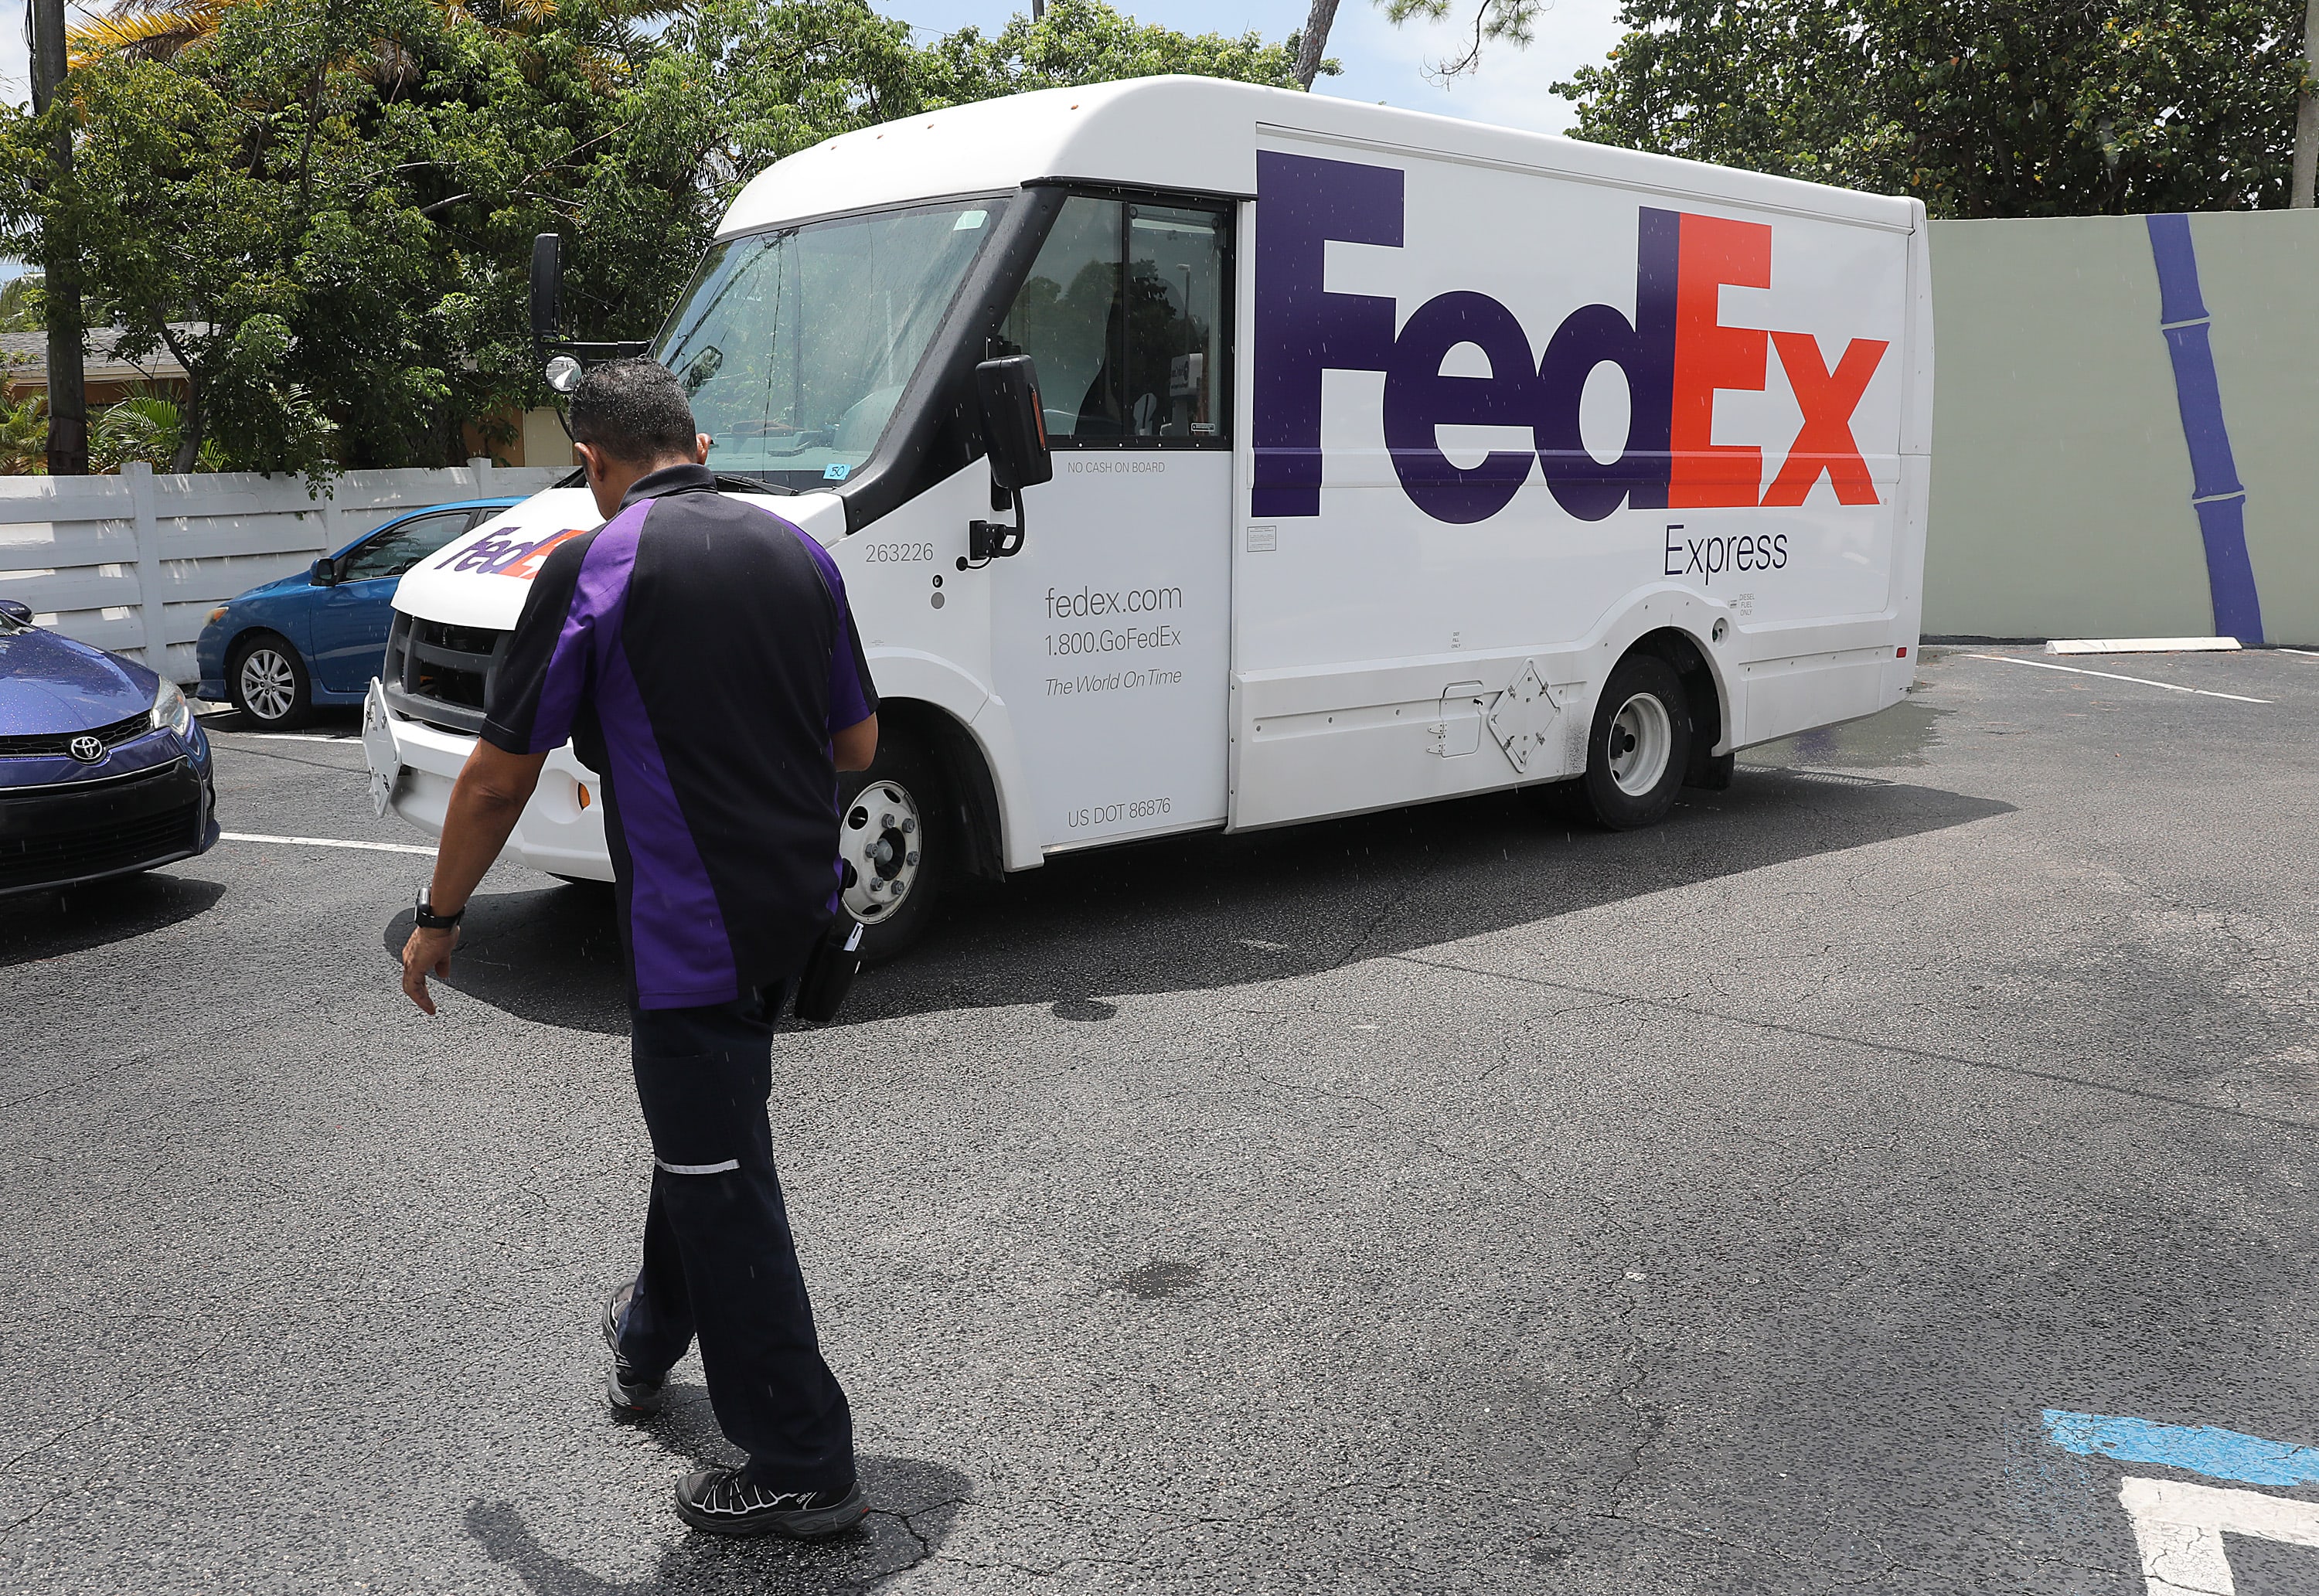 track fedex ground packages